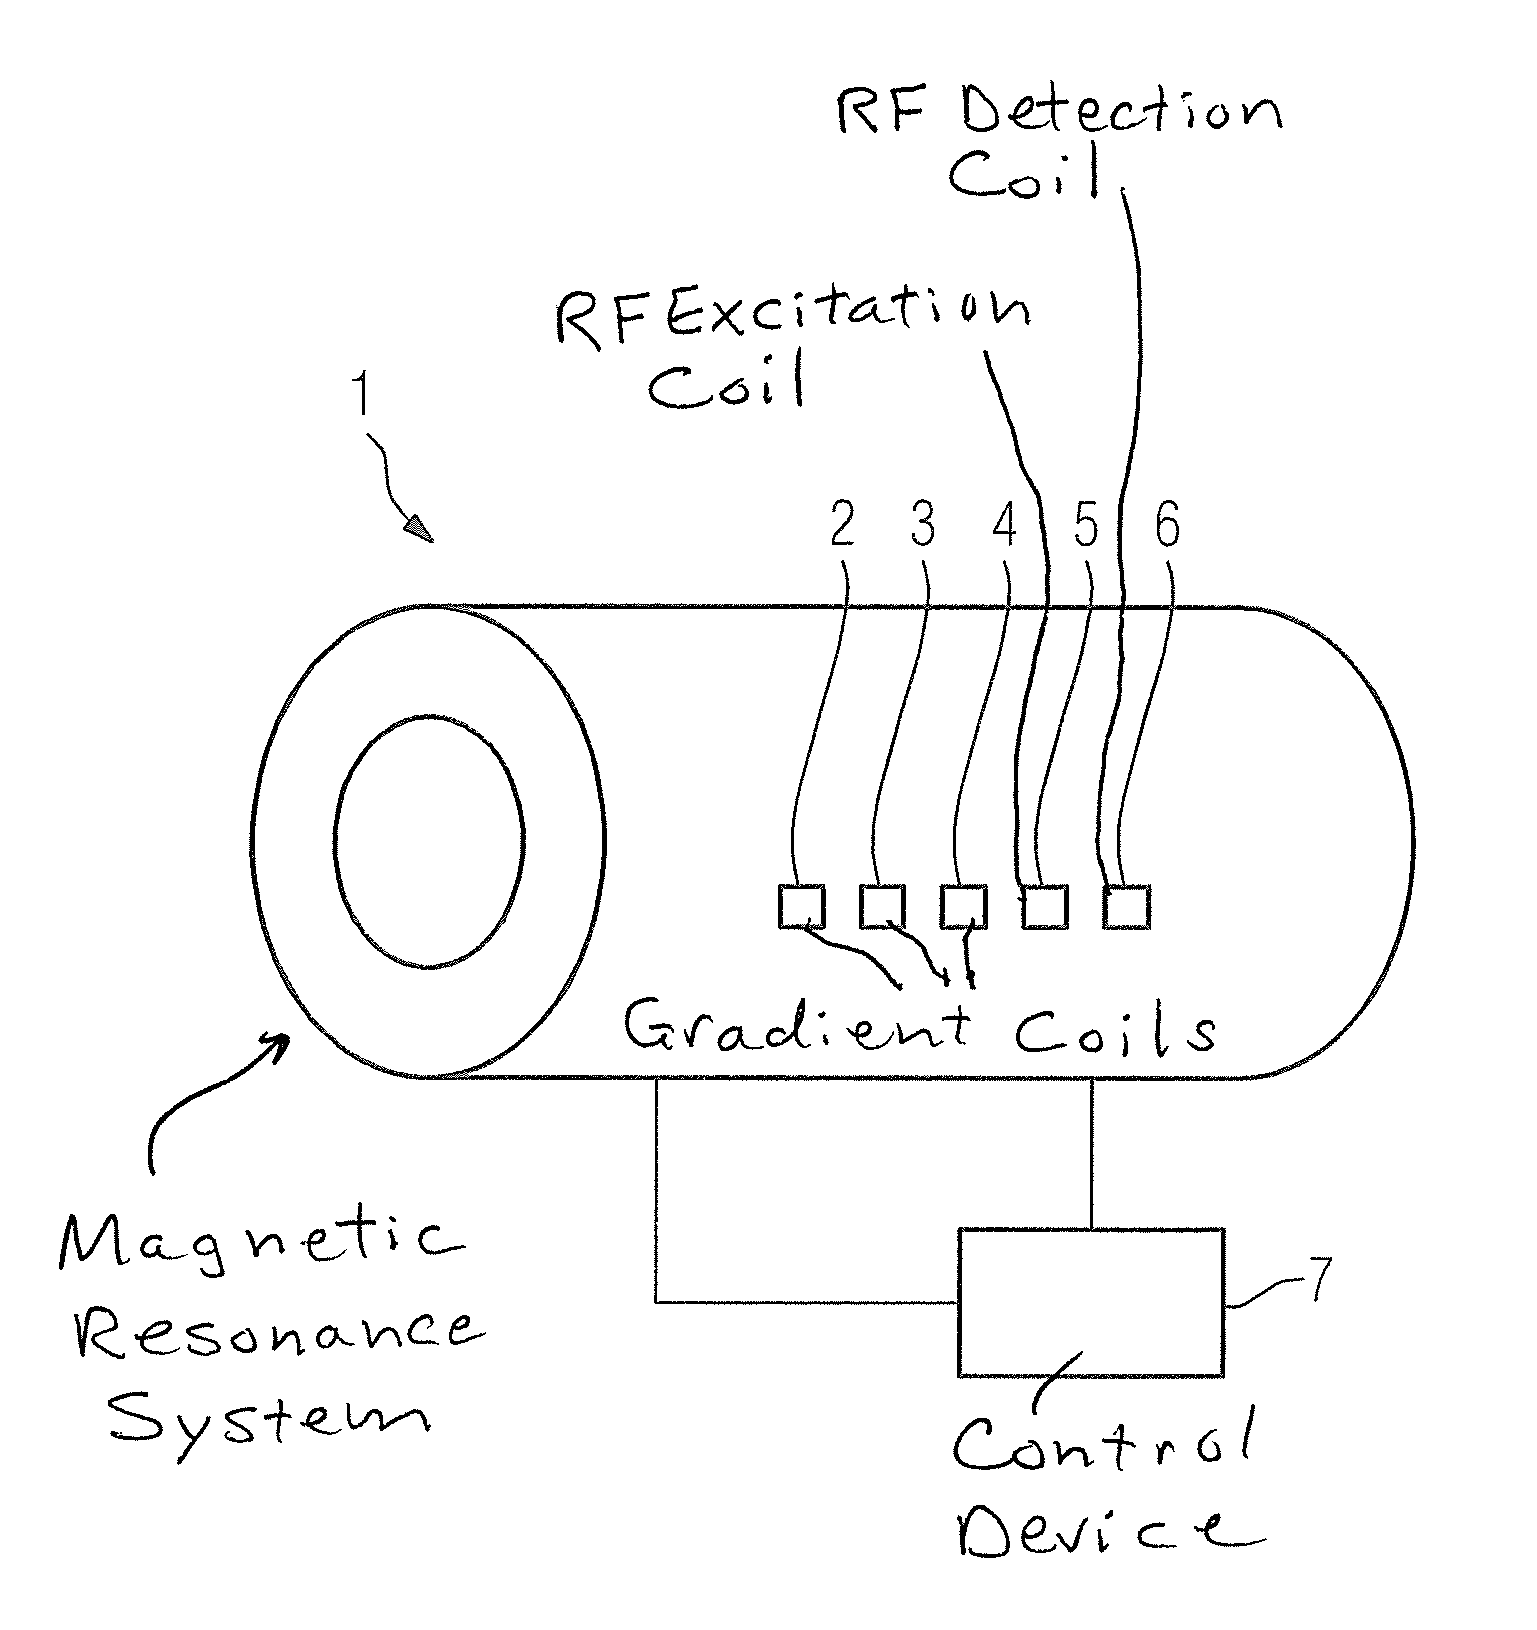 Automated determination of the resonance frequencies of protons for magnetic resonance examinations